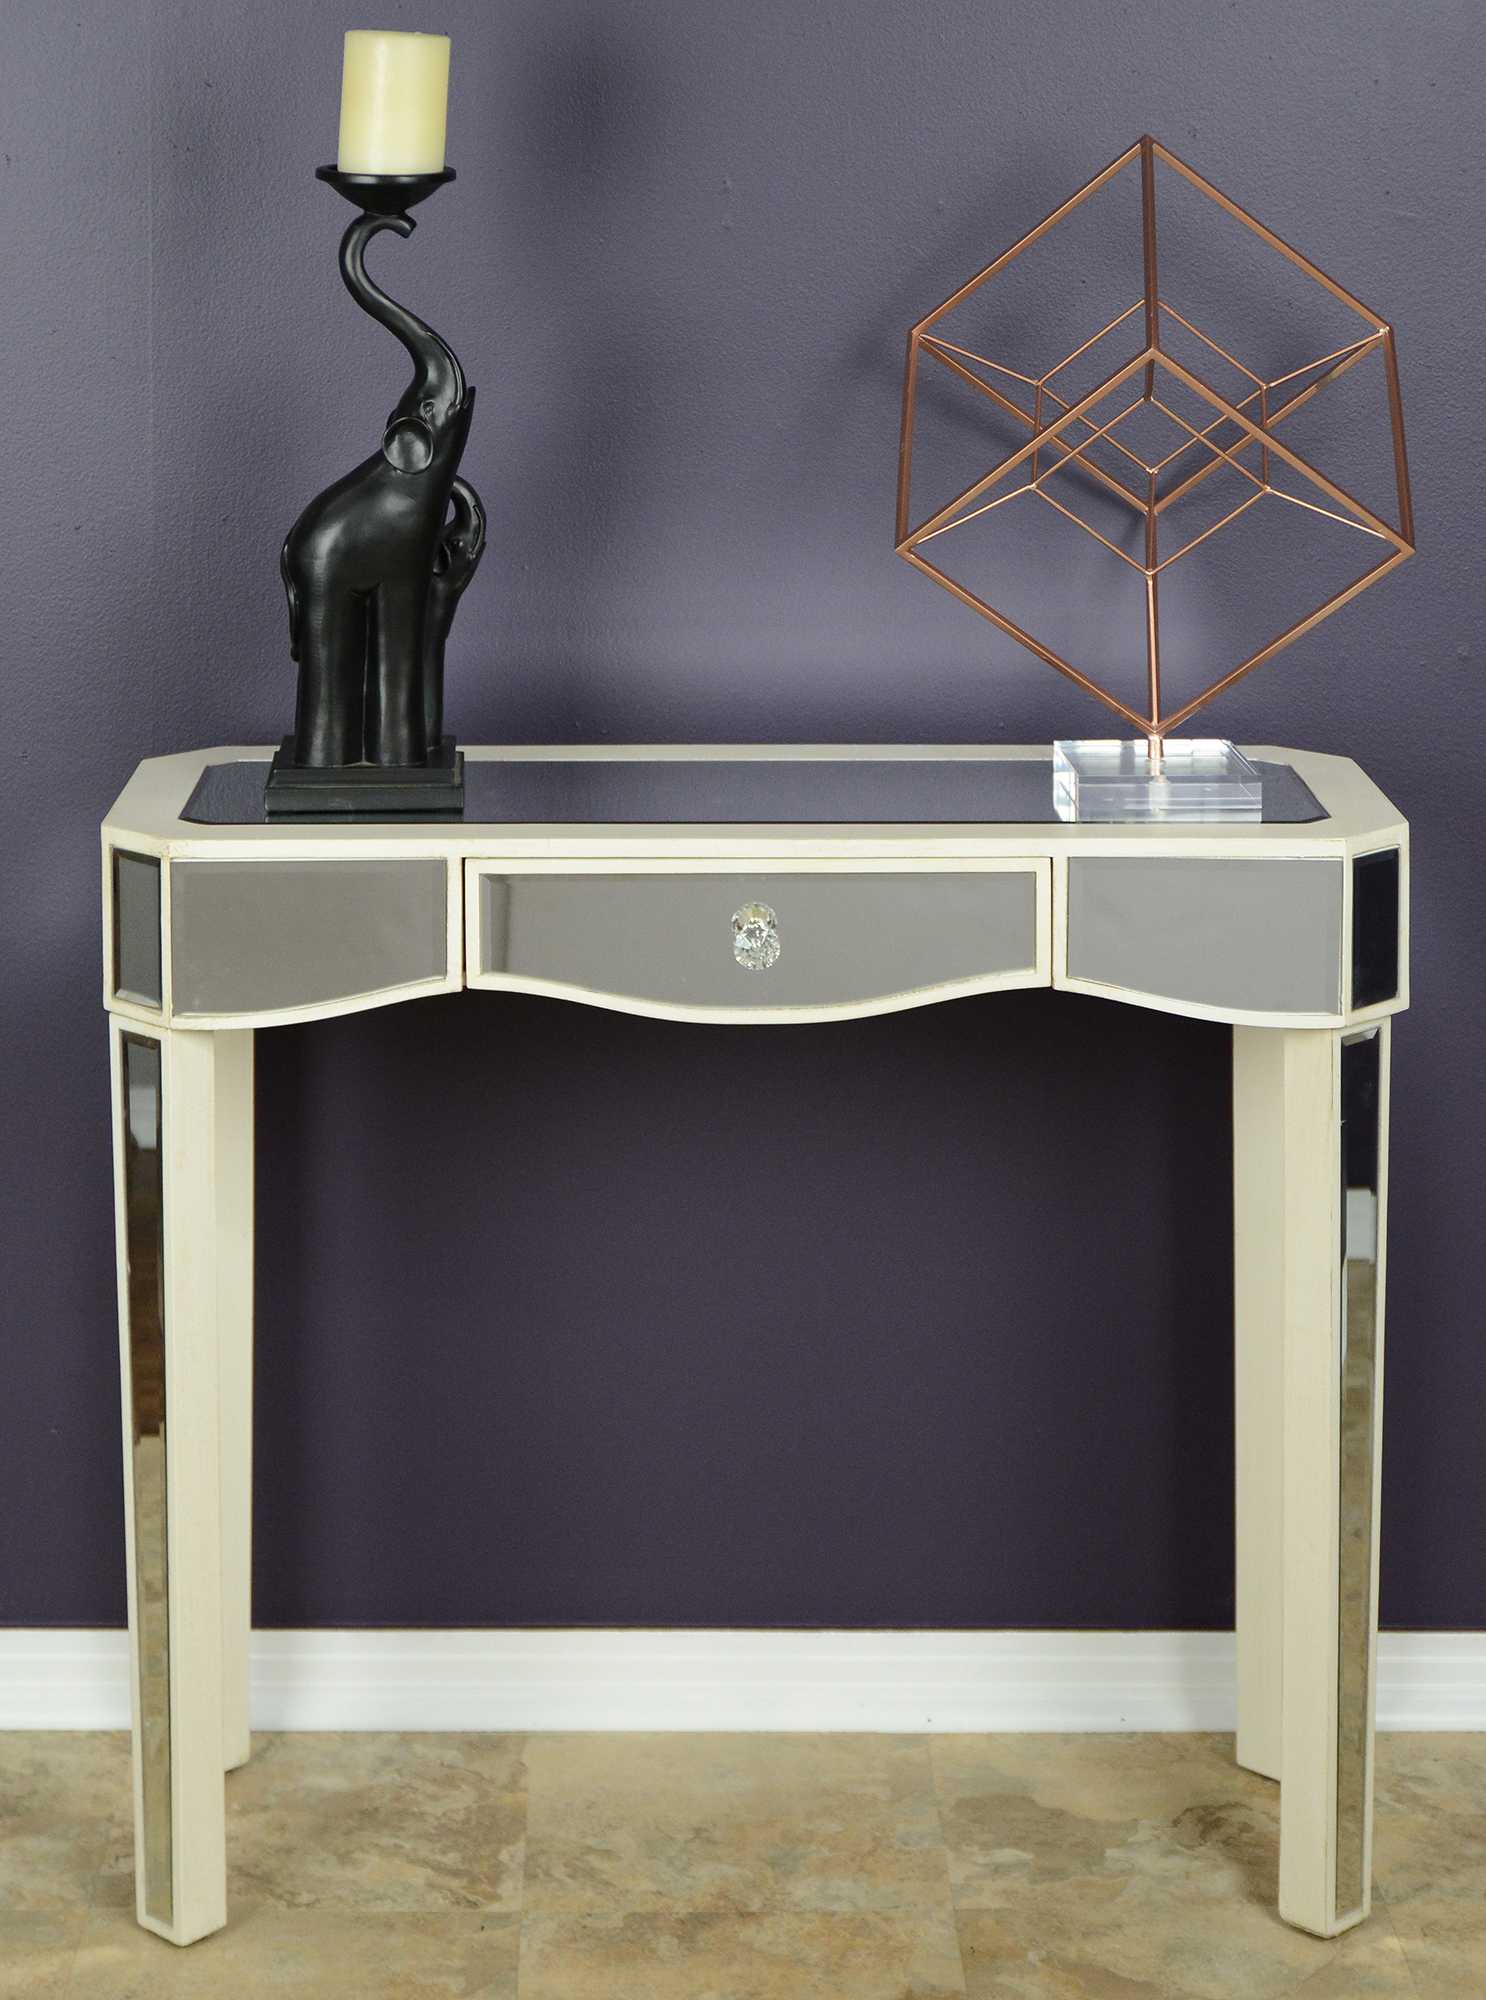 35.5" X 13" X 31" Antique White MDF Wood Mirrored Glass Console Table with a Mirrored Glass Top and a Drawer